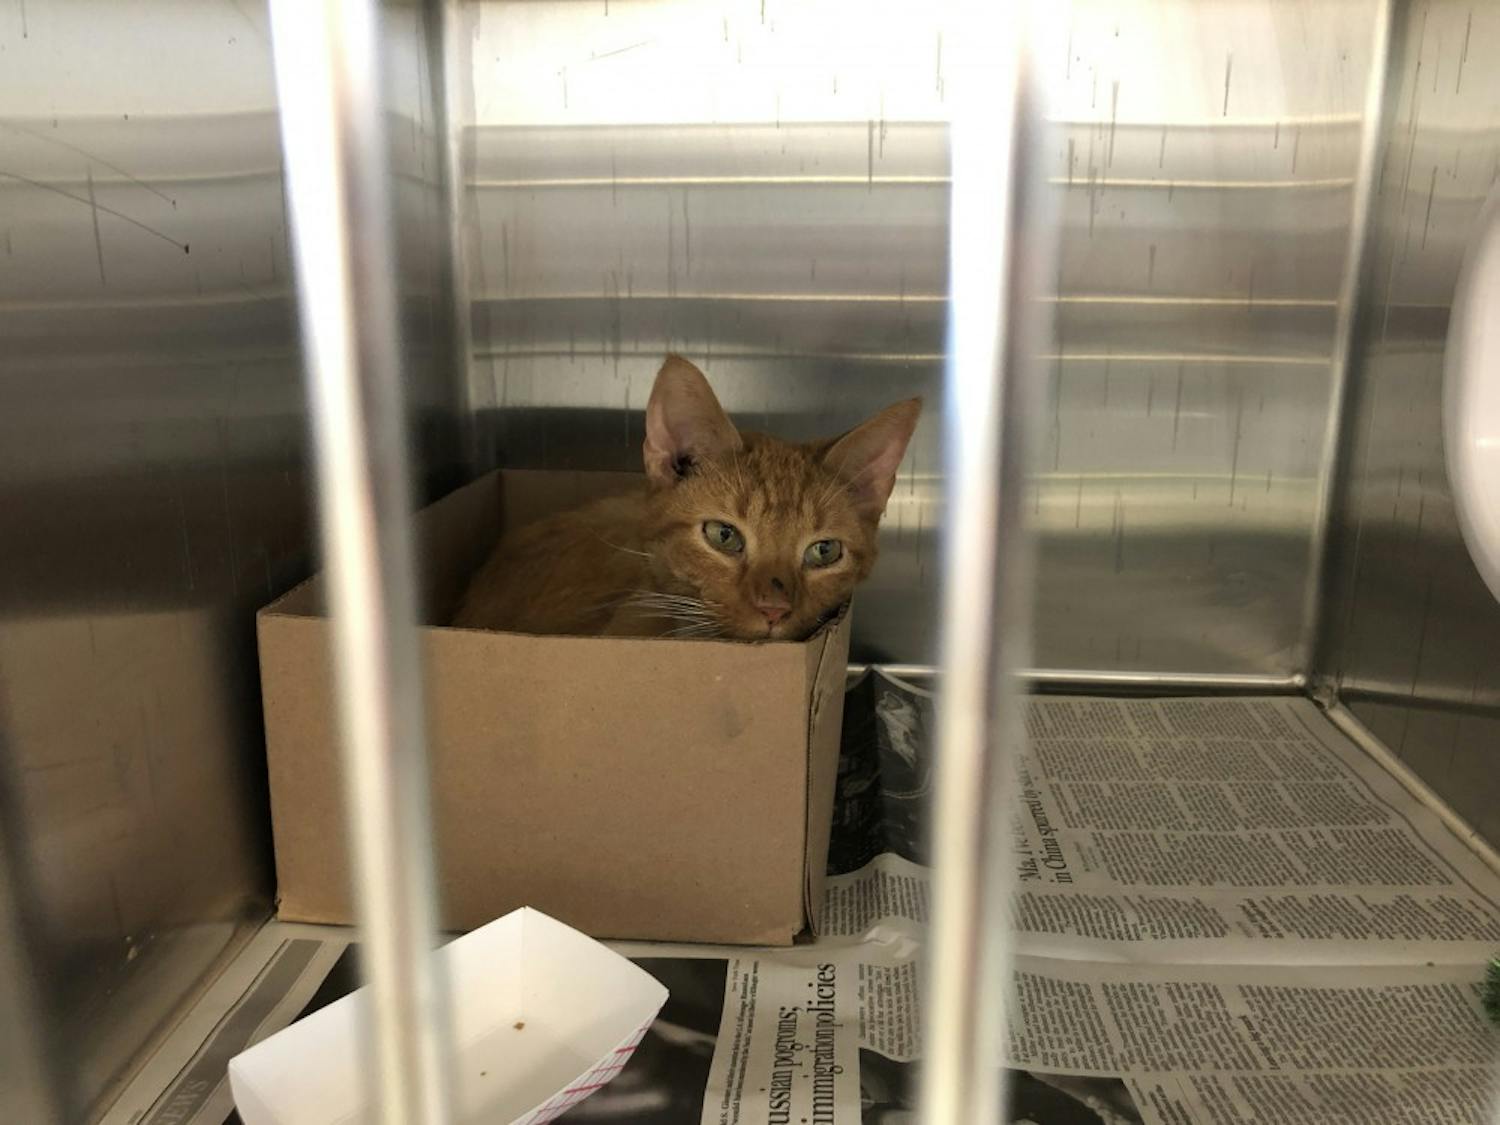 Tigger is a seven-year-old shorthair cat that is available for adoption at the SPCA. Volunteers can apply to work in their cat colony rooms or clean the kennels.